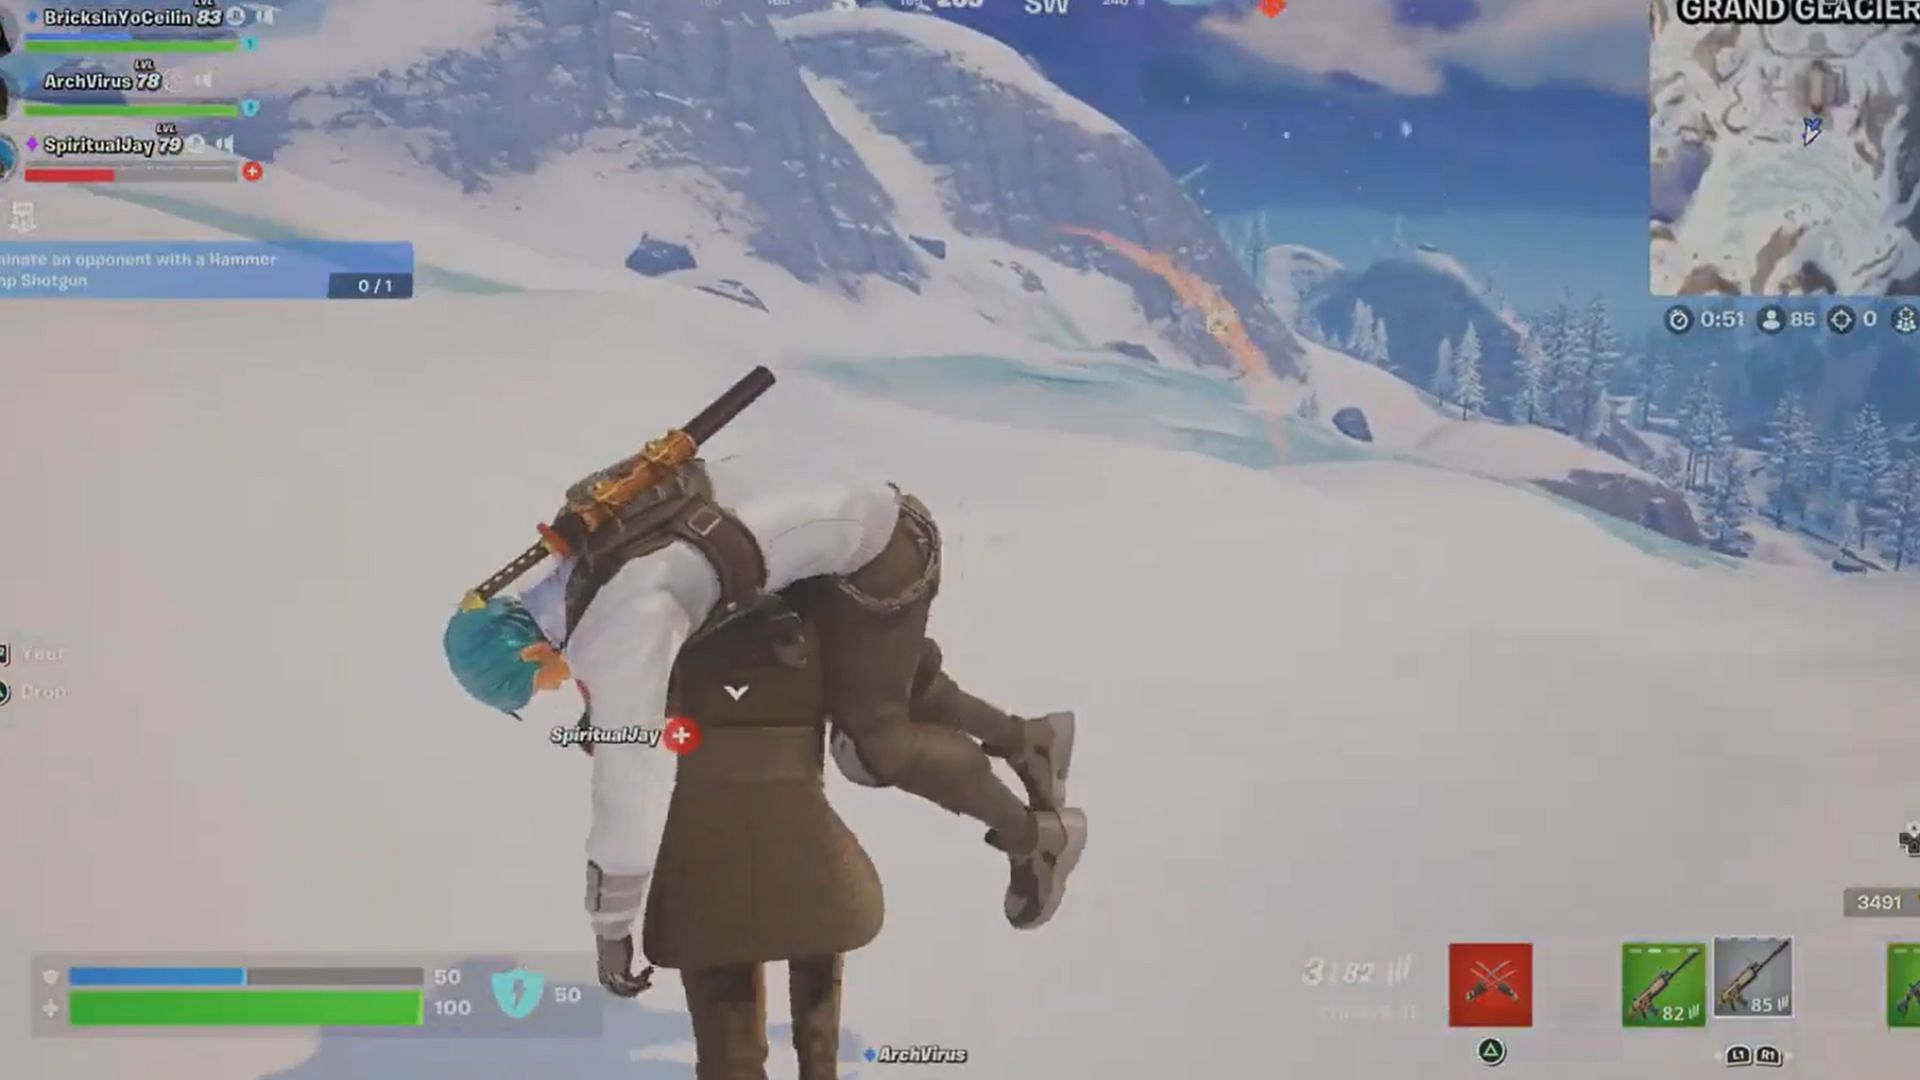 &quot;Yeeeet&quot;: Fortnite player gets revenge on greedy teammate, community supports their decision